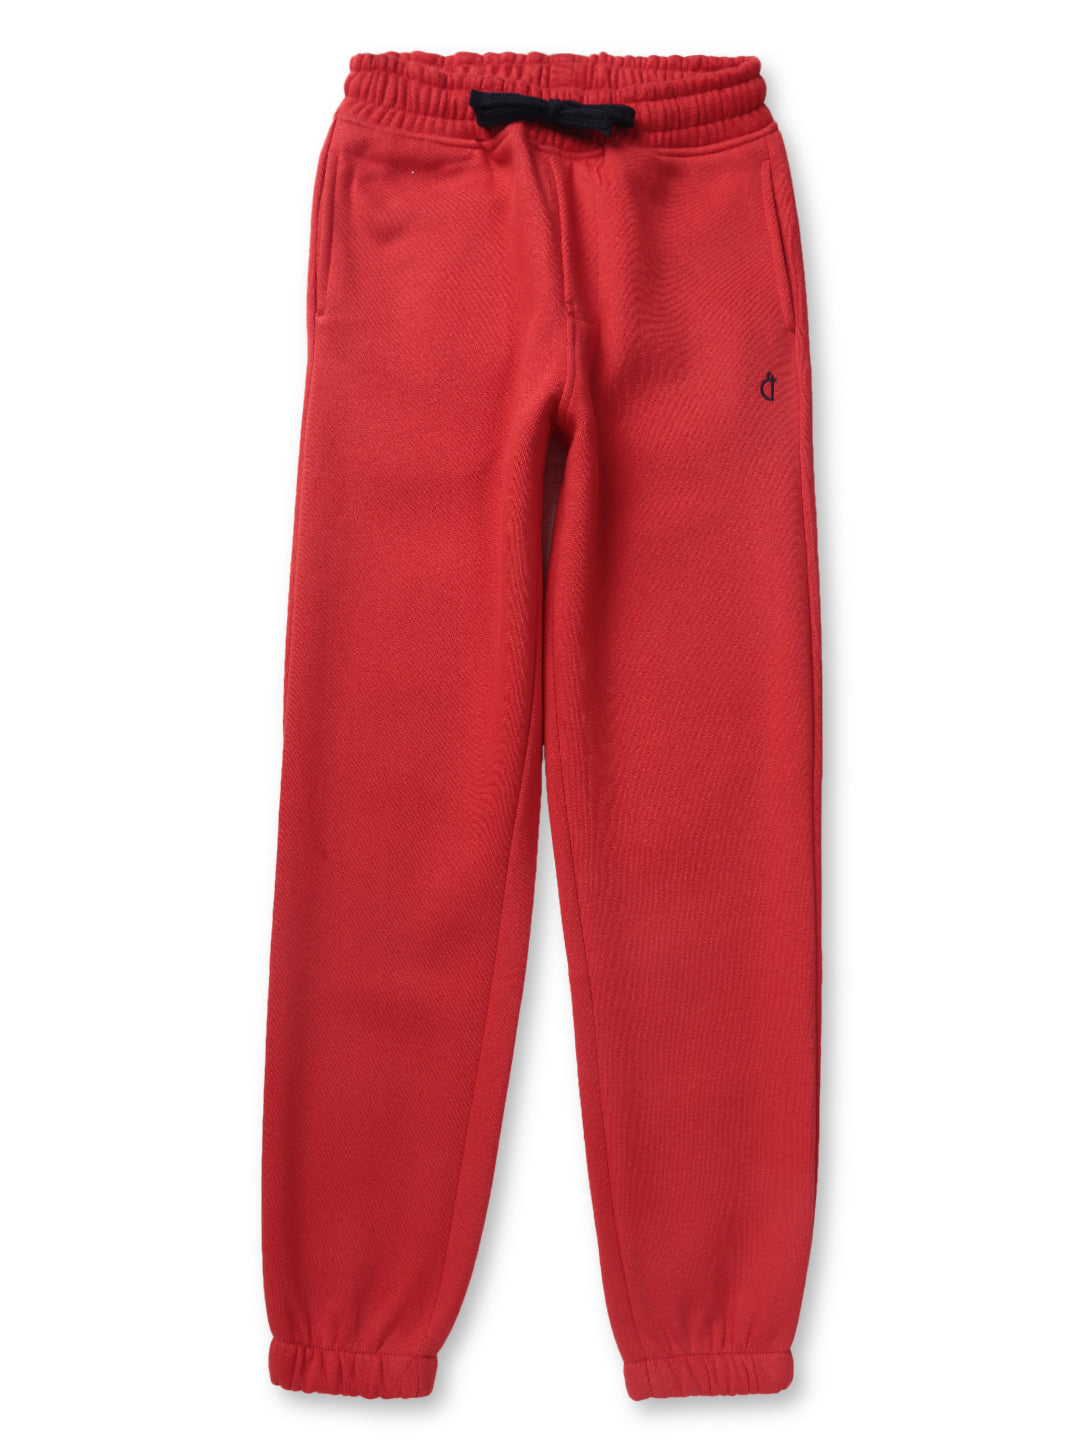 Boys Red Solid Fleece Track Pant